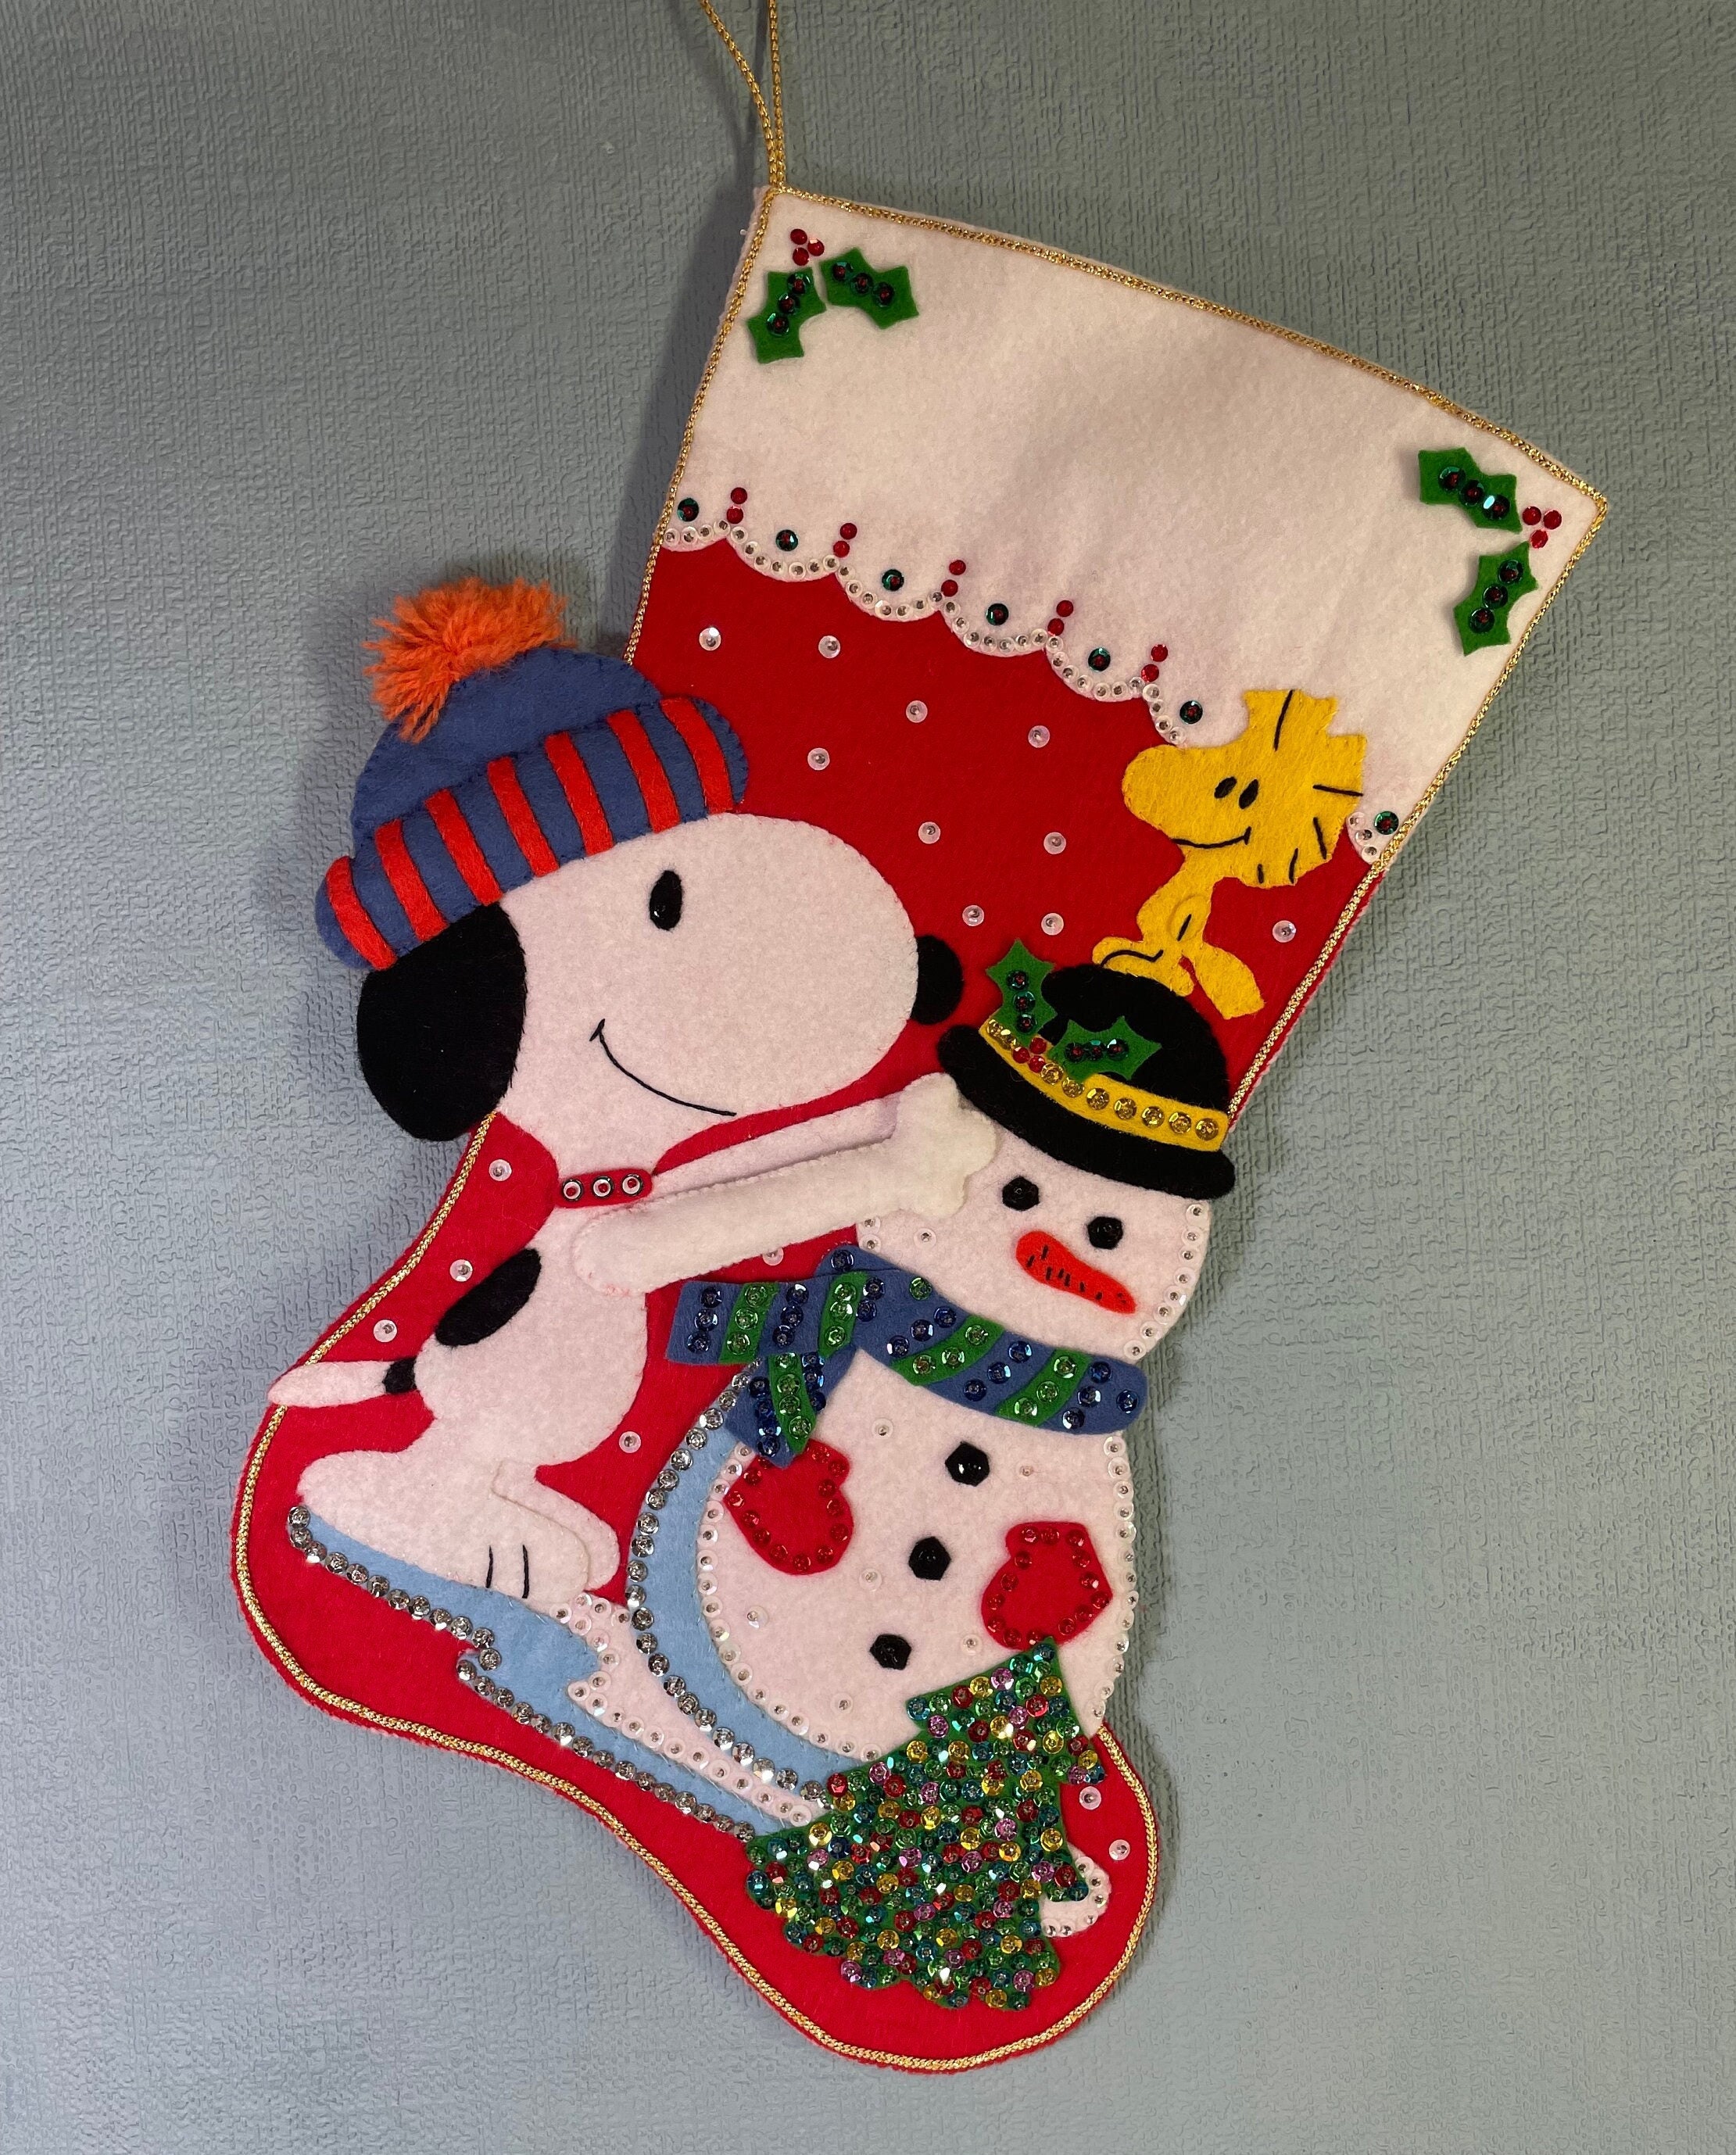 Trolls Christmas Stocking Picture of Poppy with JOY on White Cuff New w/Tag